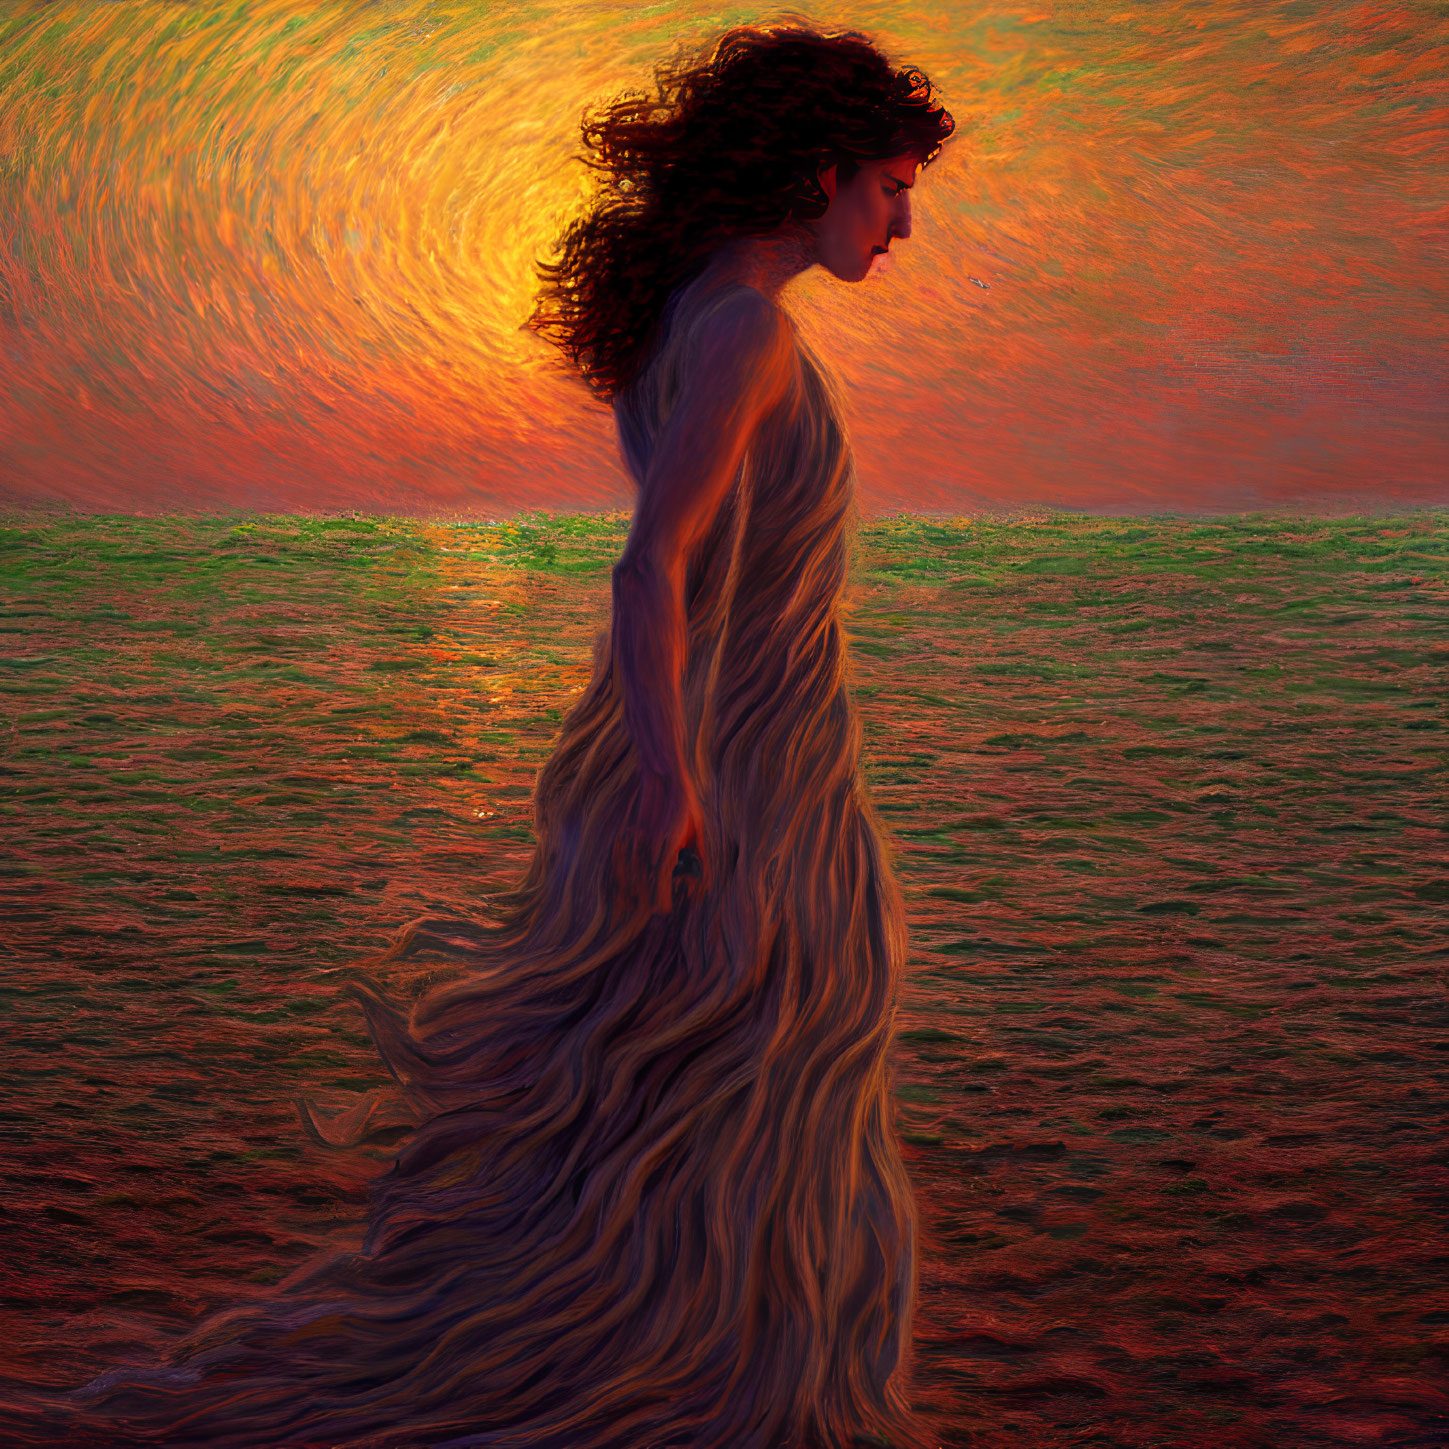 Woman in flowing dress against vibrant sunset backdrop evokes movement and passion.